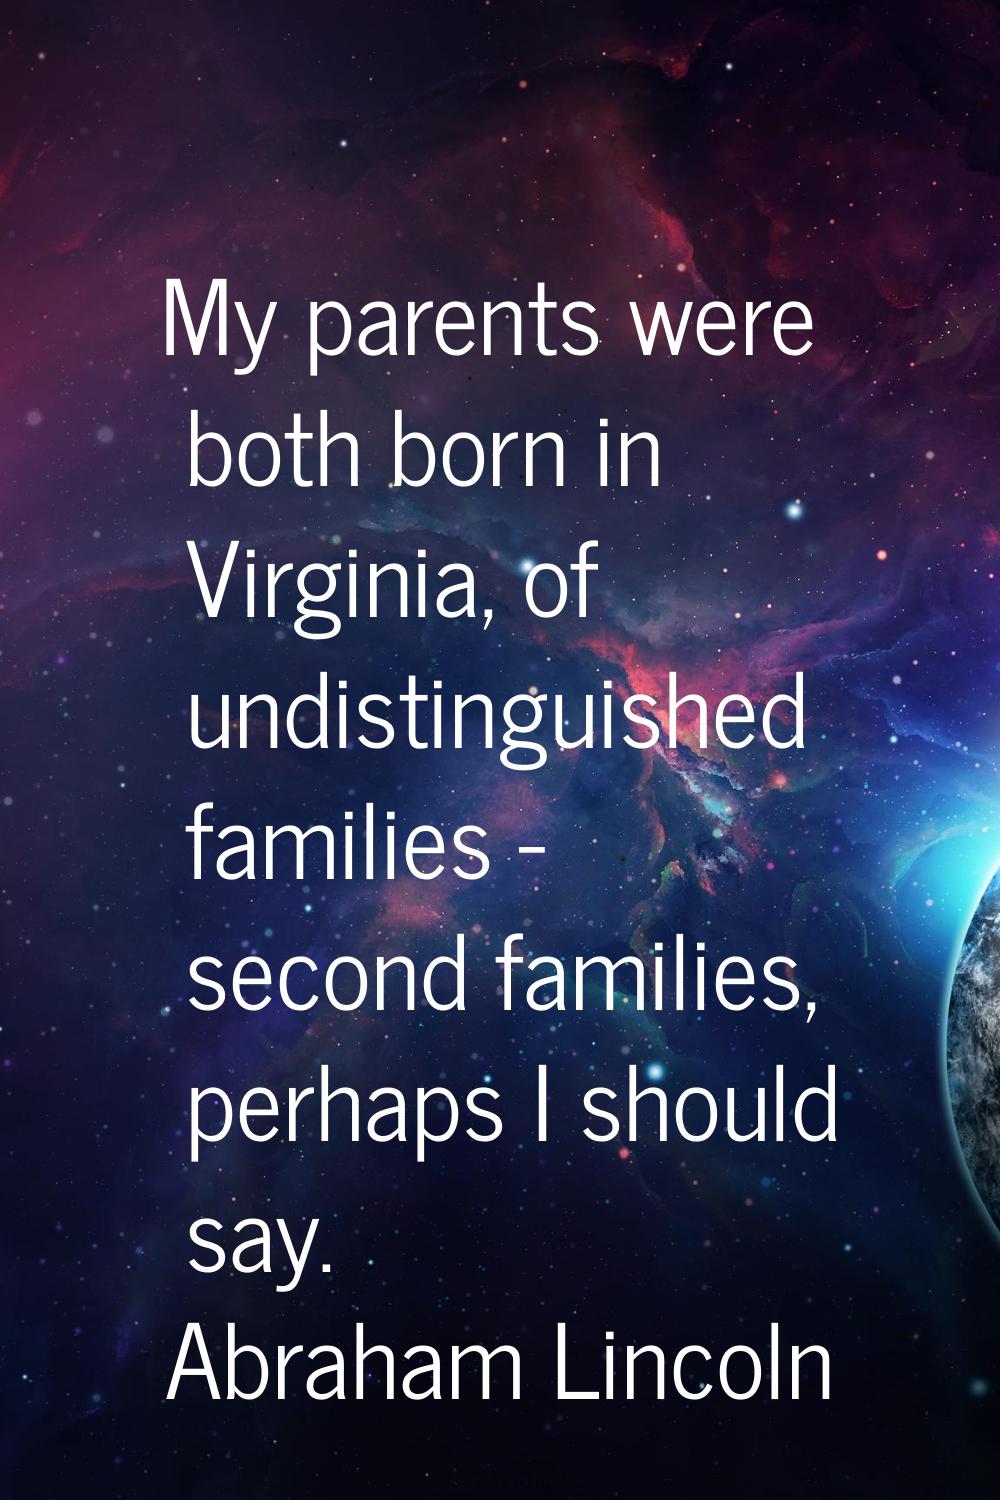 My parents were both born in Virginia, of undistinguished families - second families, perhaps I sho